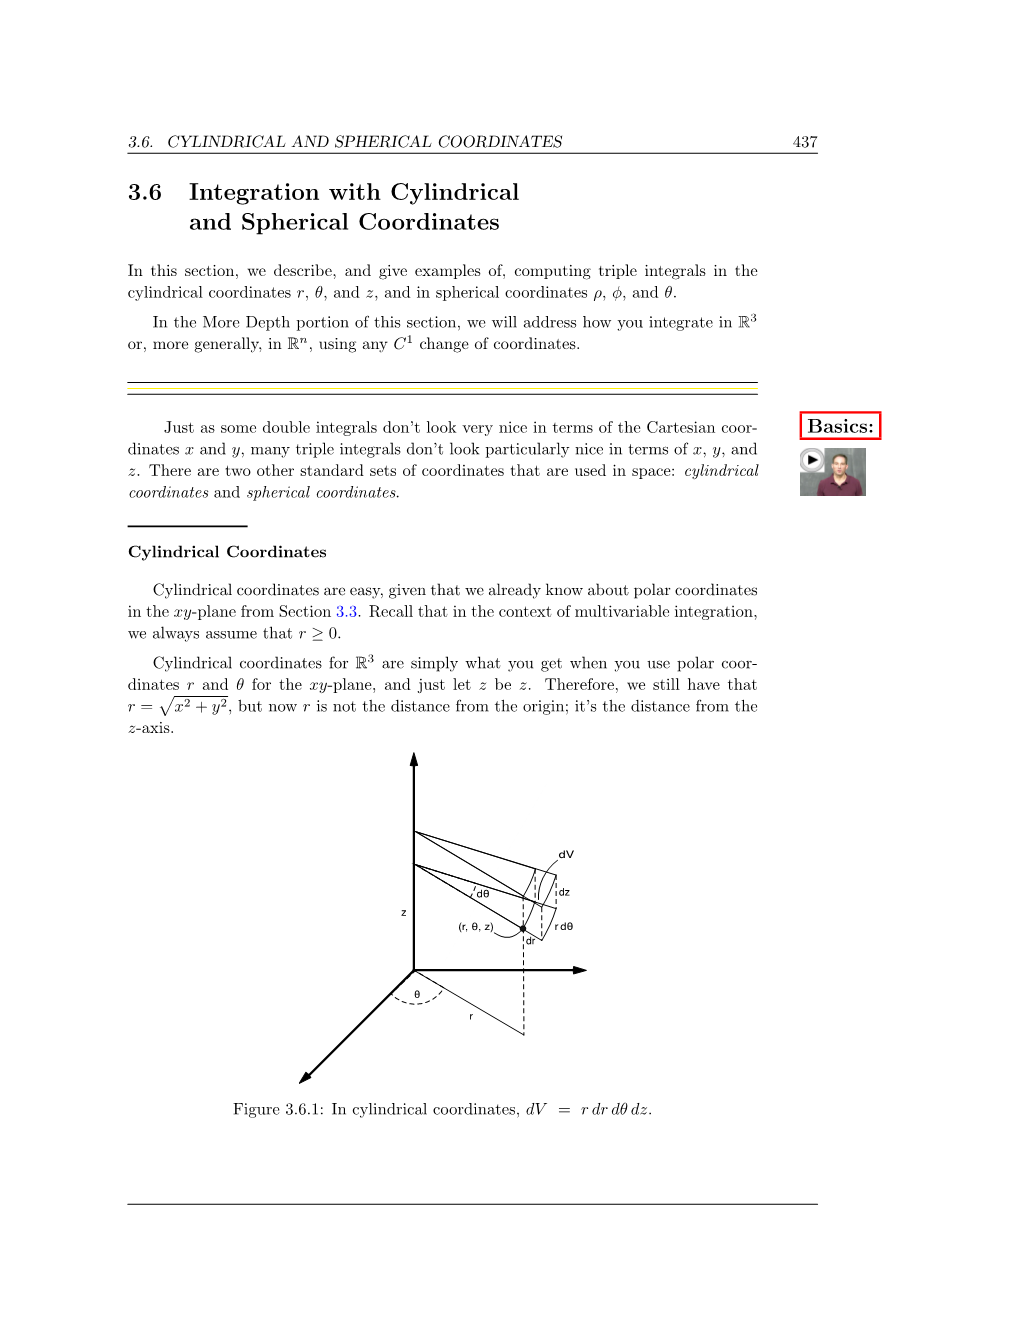 3.6 Integration with Cylindrical and Spherical Coordinates